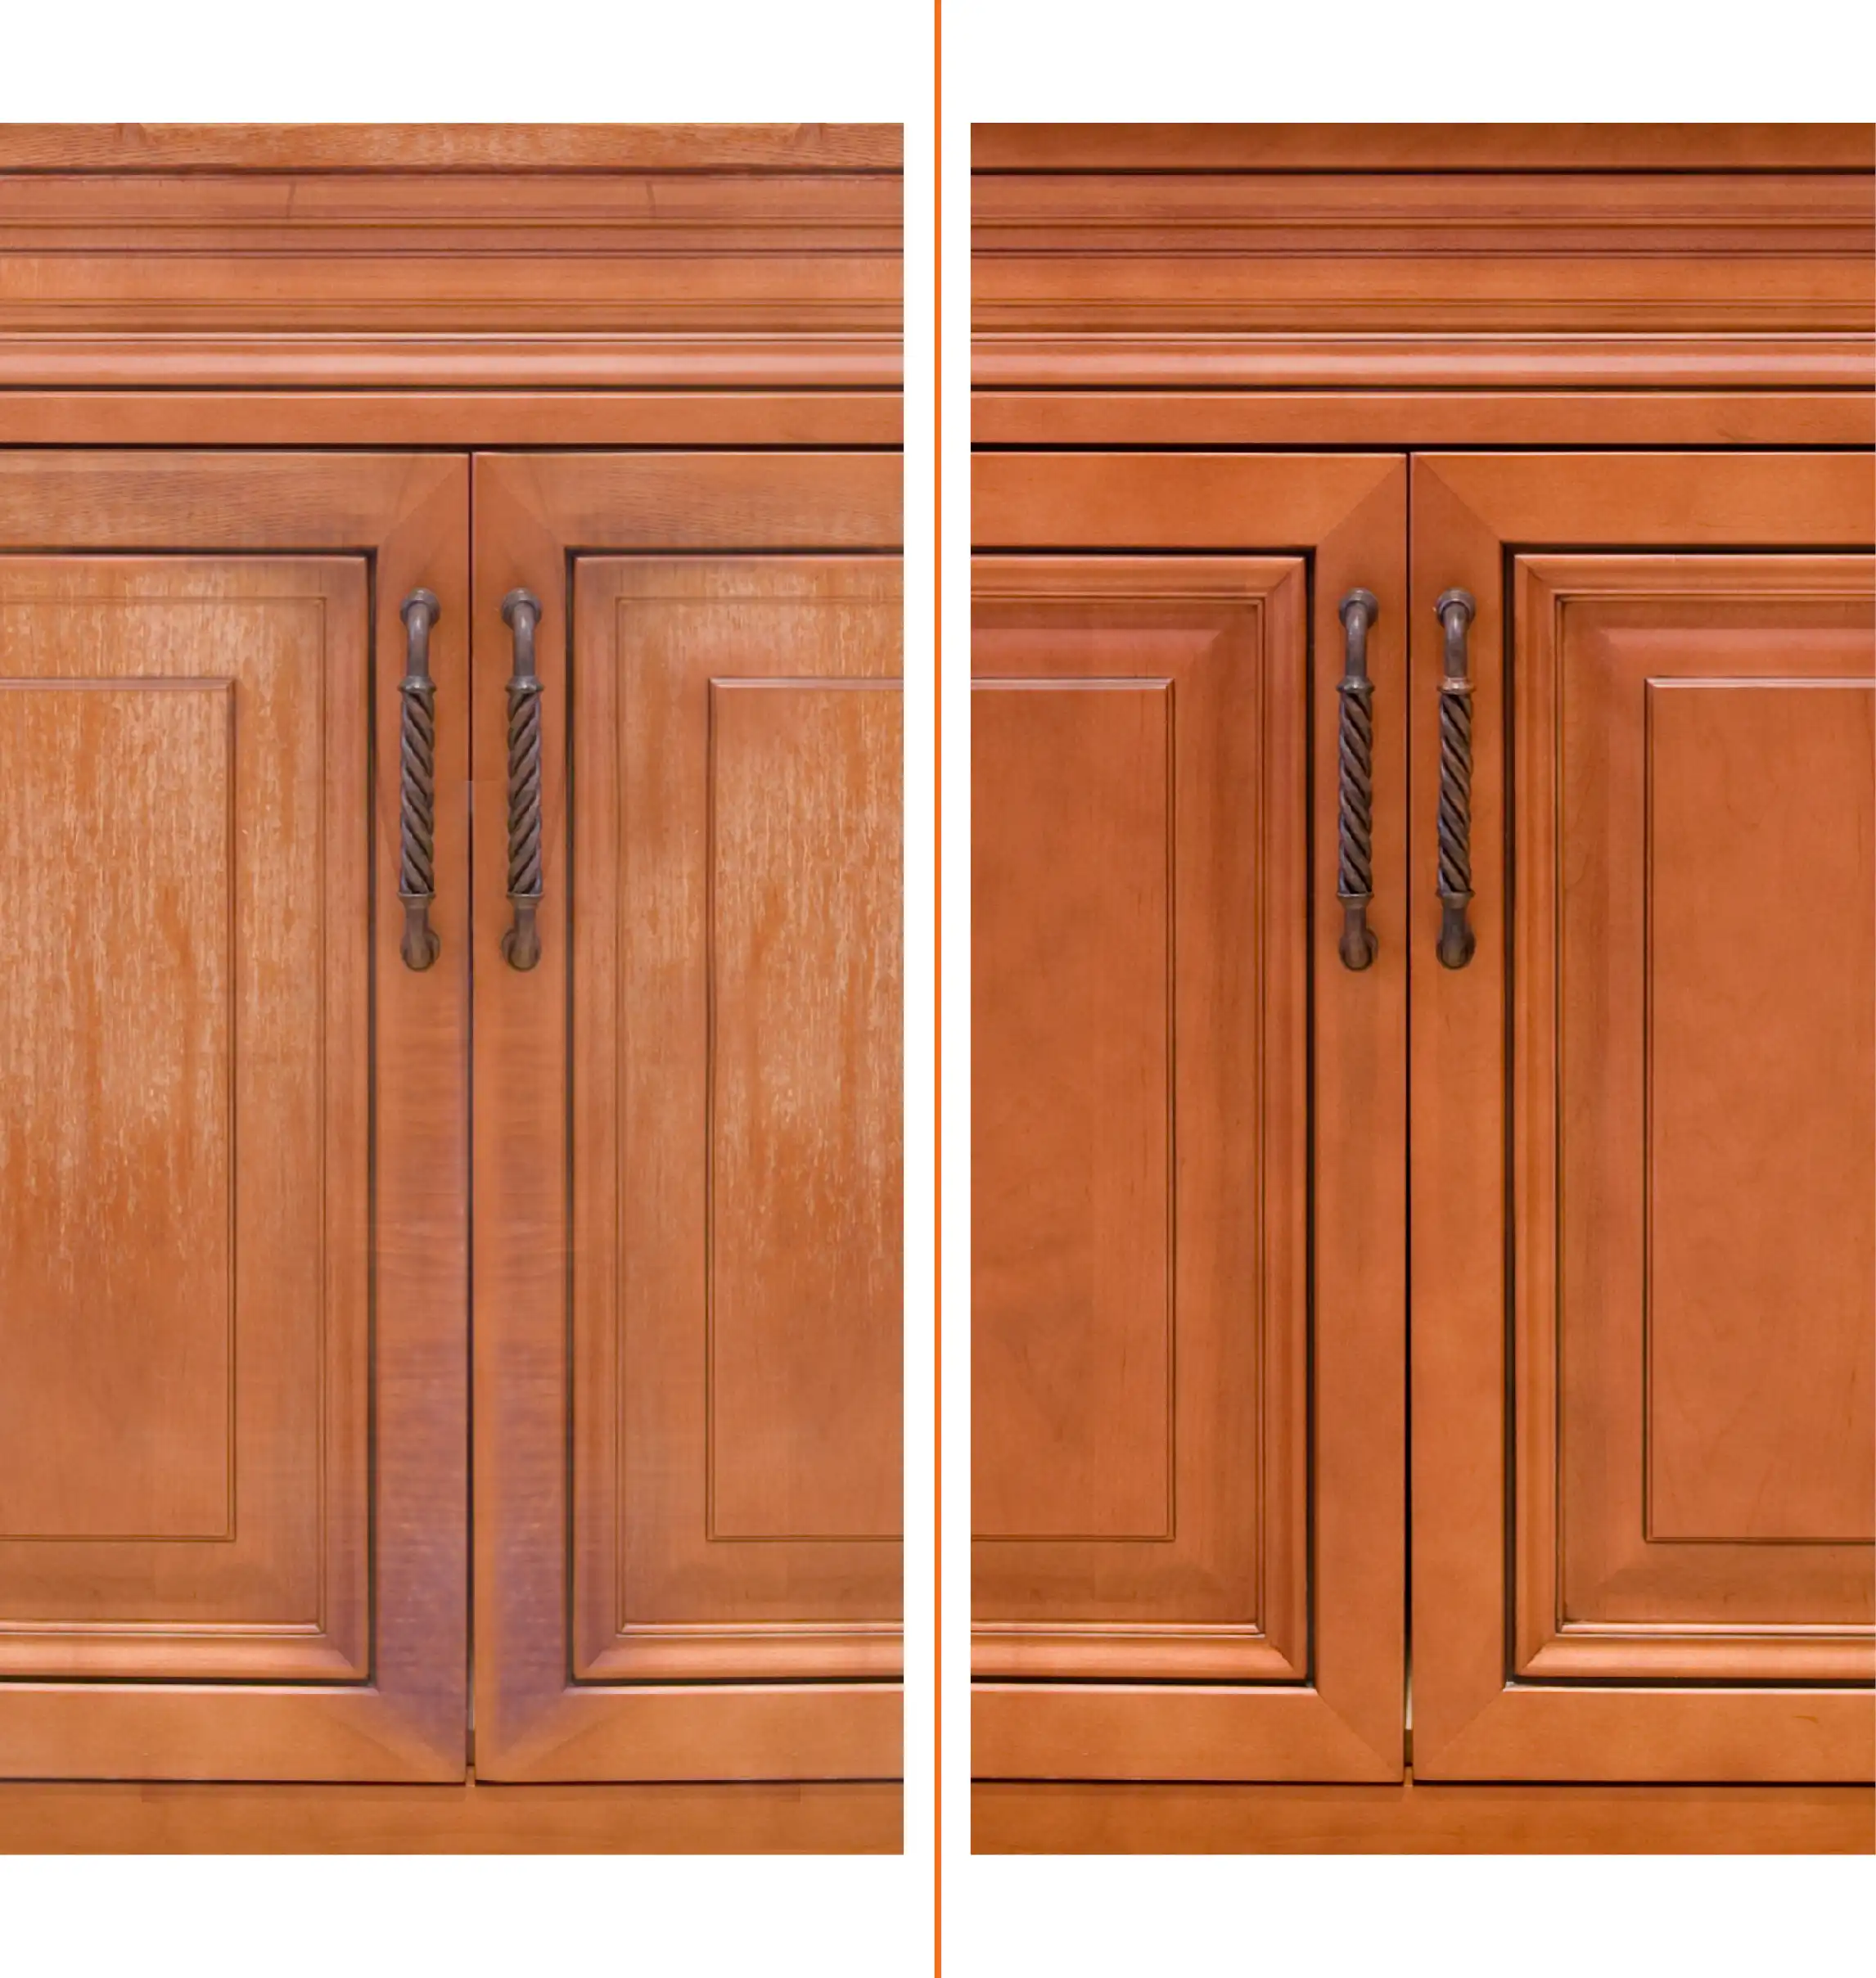 side by side showing N-Hance cabinet refinishing with wood cabinets